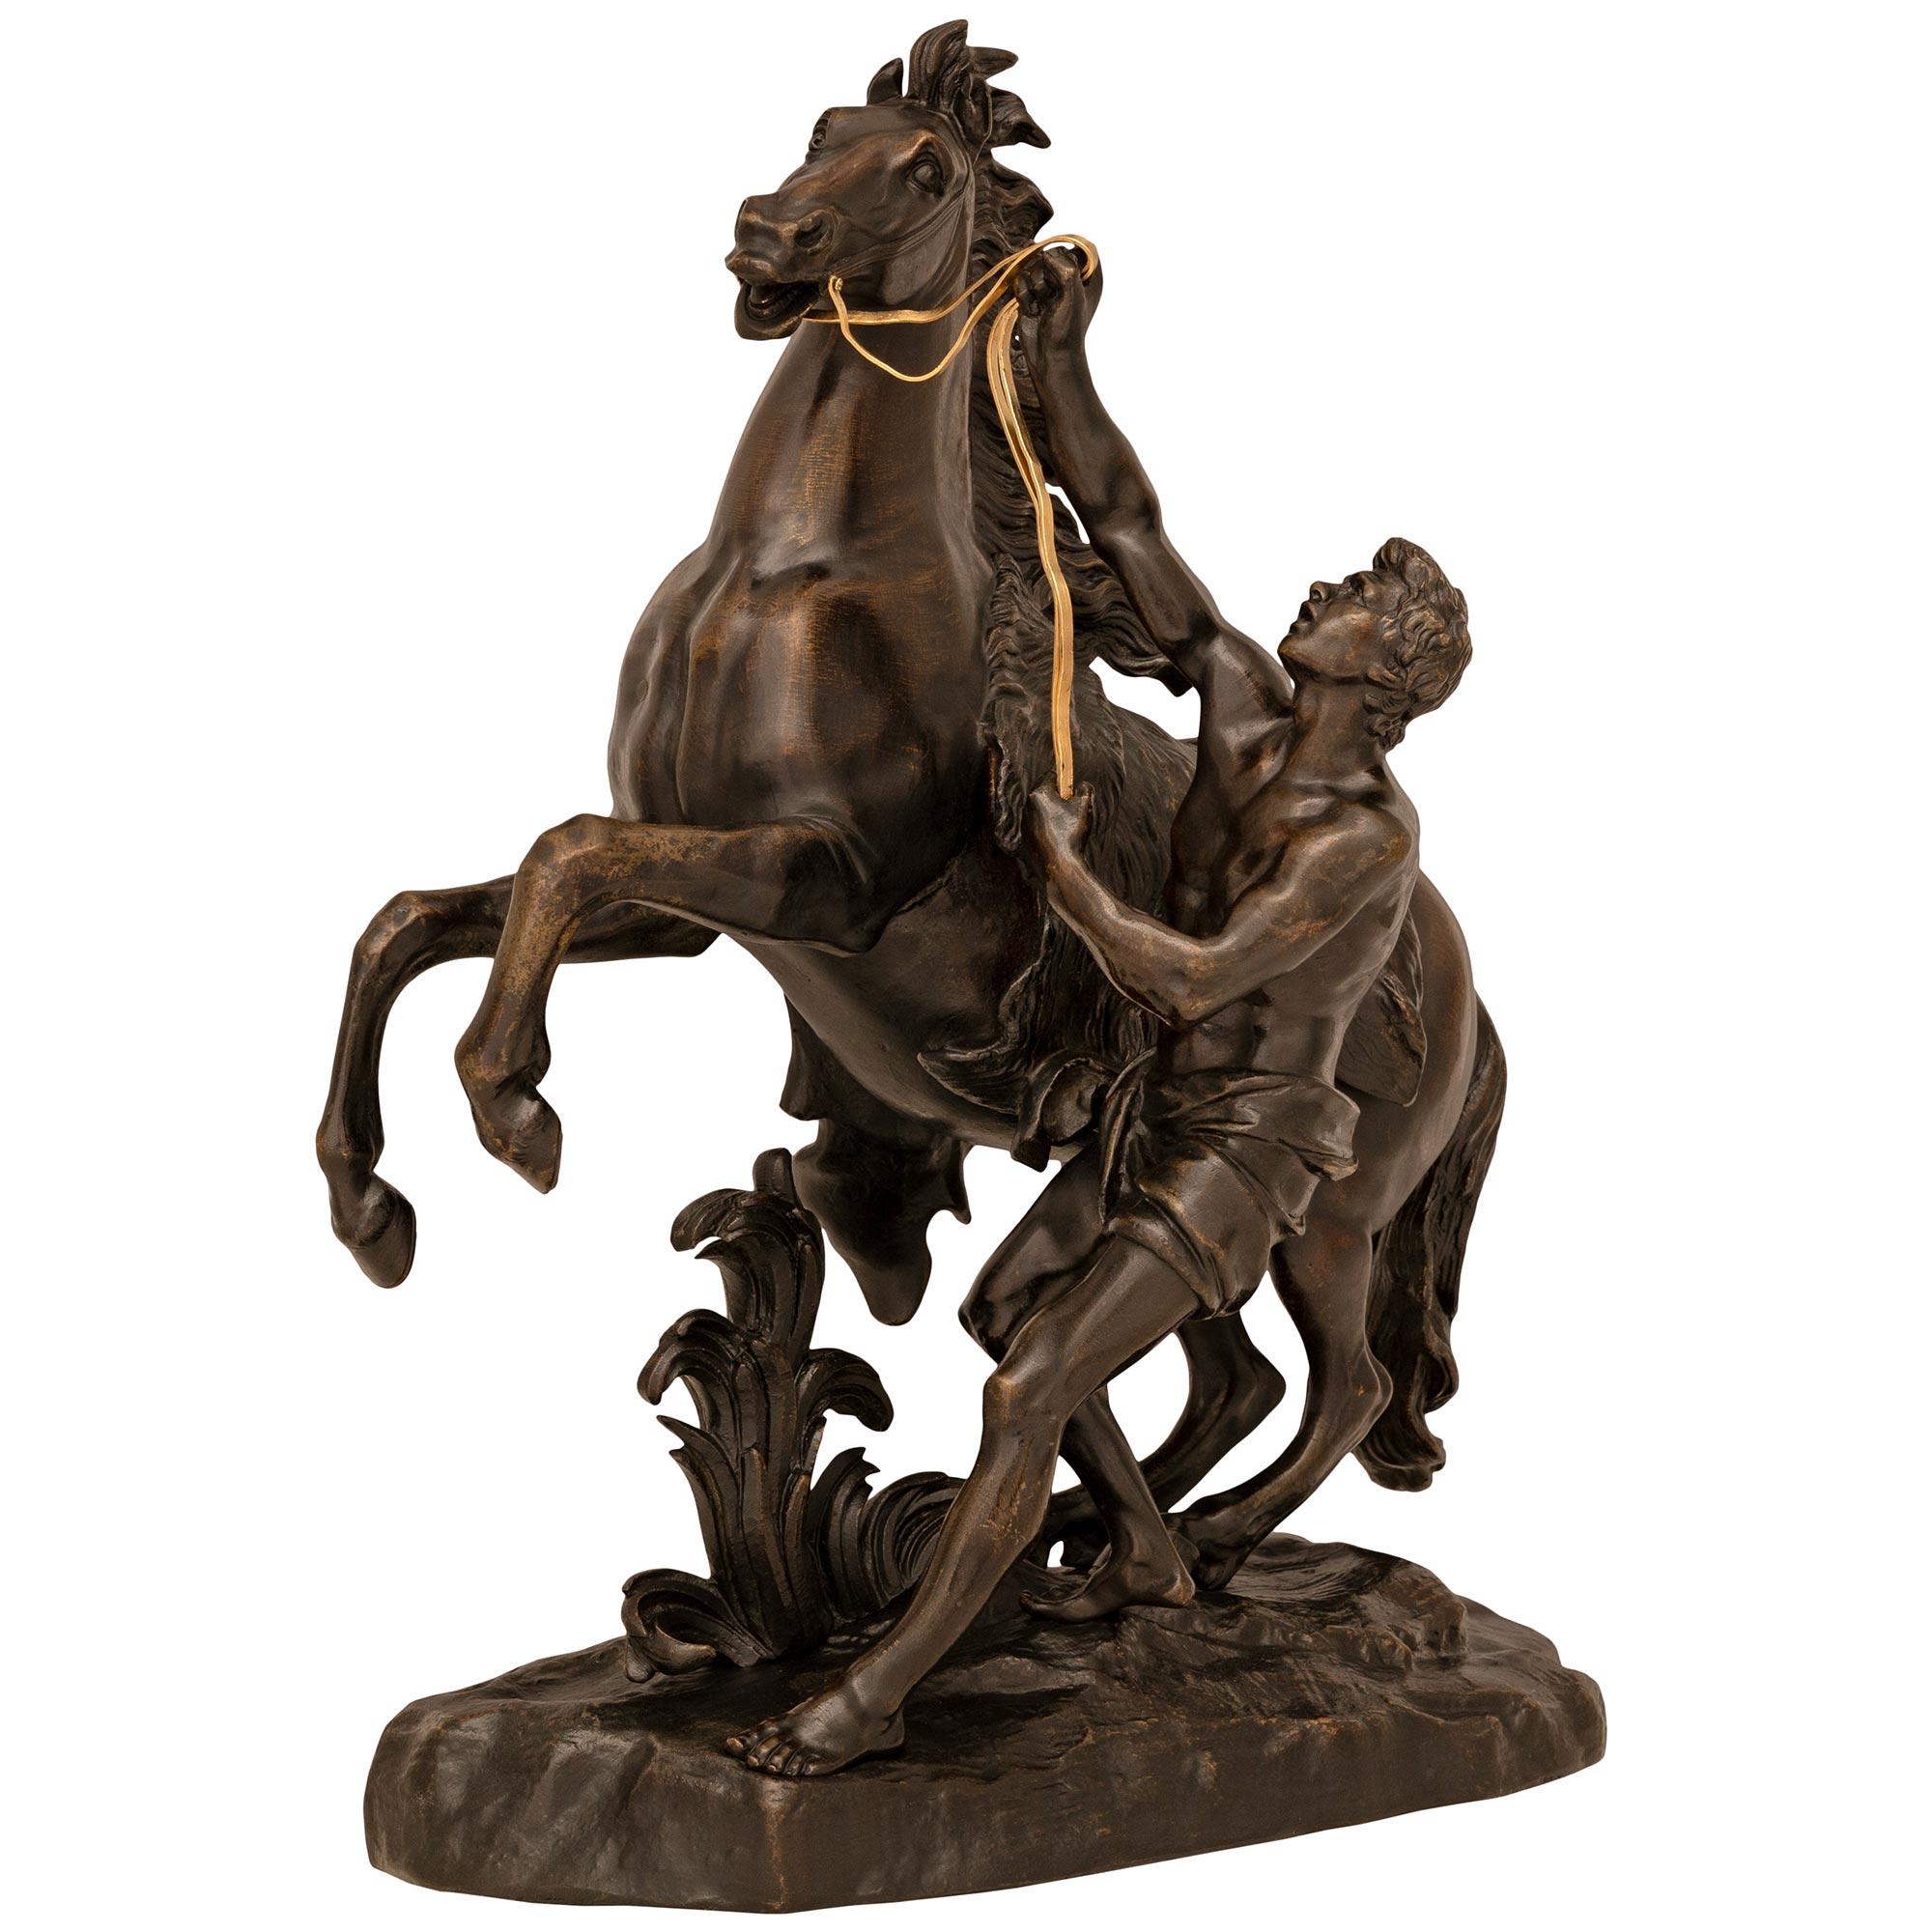 A most impressive and large scale true pair of French 19th century patinated Bronze Marly horse statues, after a model by Coustou. Each statue is raised on a rock and ground like designed base where the wonderfully detailed stallions are rearing